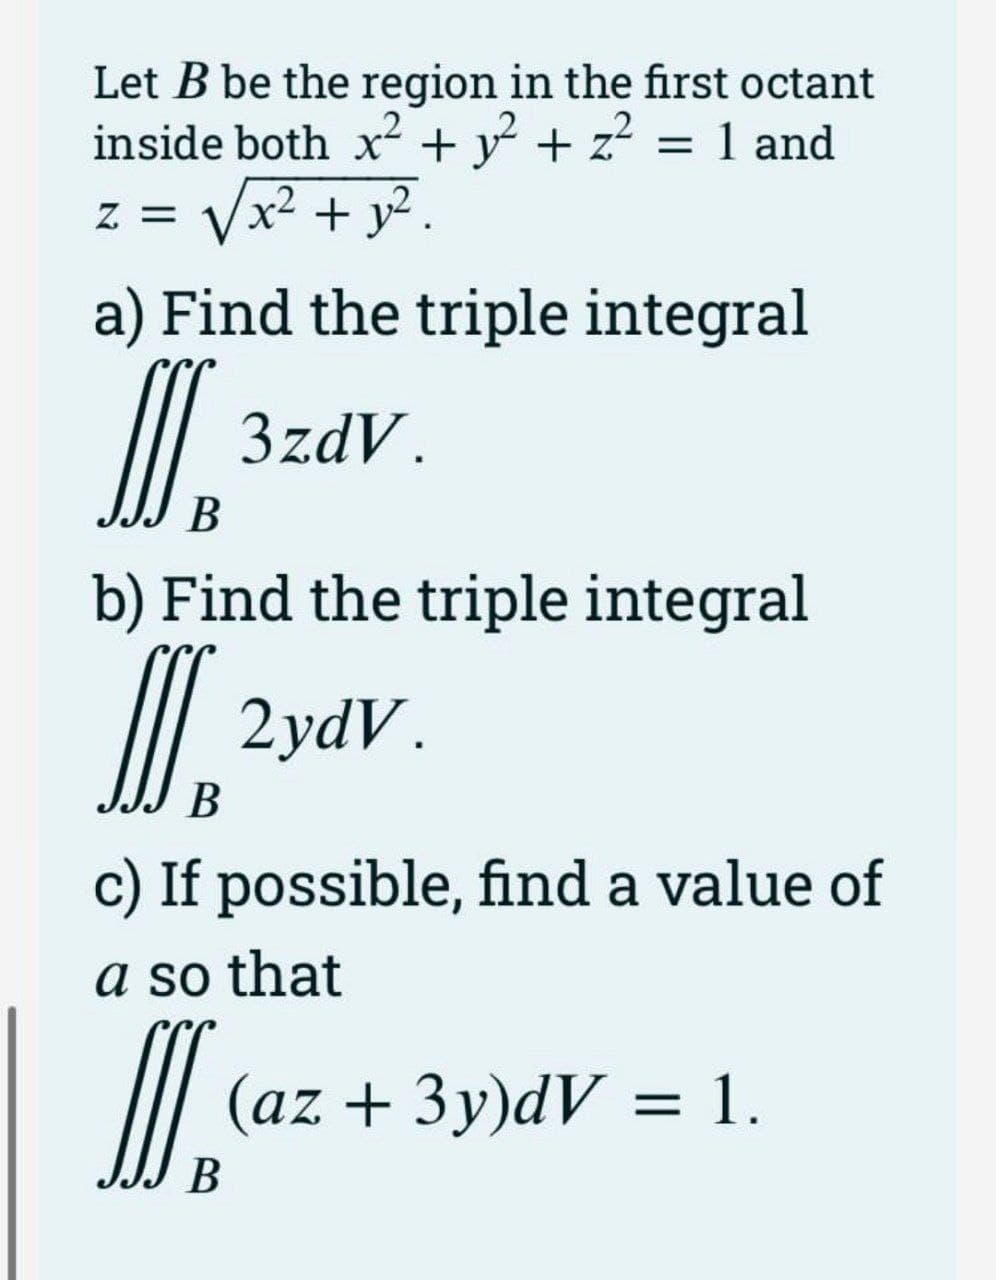 Let B be the region in the first octant
inside both x + y + z = 1 and
z = Vx² + y? .
a) Find the triple integral
I.
3zdV.
В
b) Find the triple integral
| 2vdv.
В
c) If possible, find a value of
a so that
(az + 3y)dV = 1.
В
